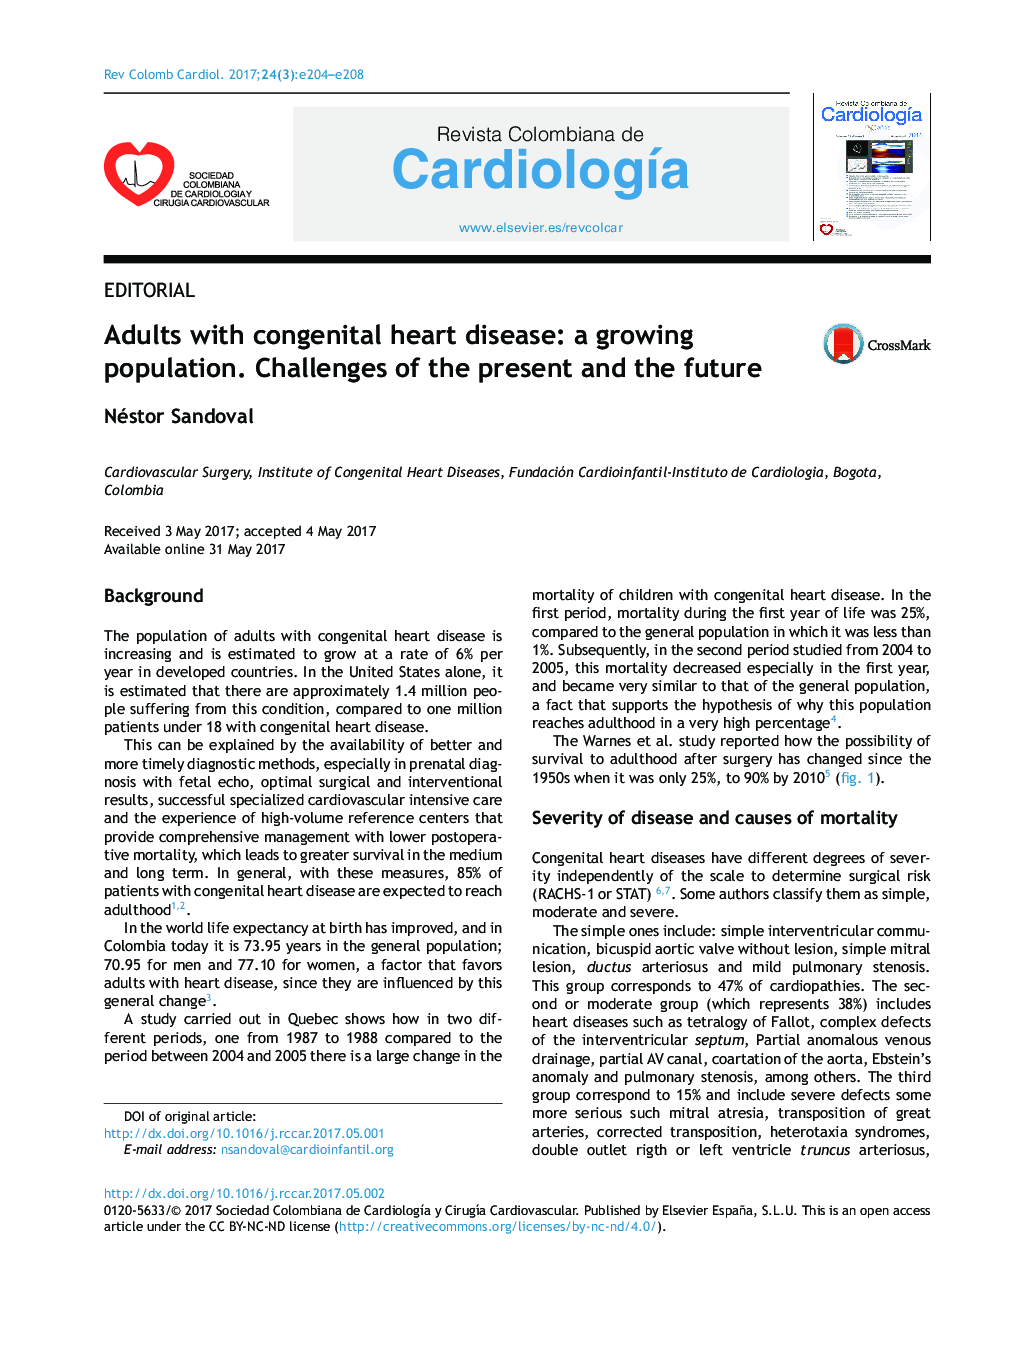 Adults with congenital heart disease: a growing population. Challenges of the present and the future